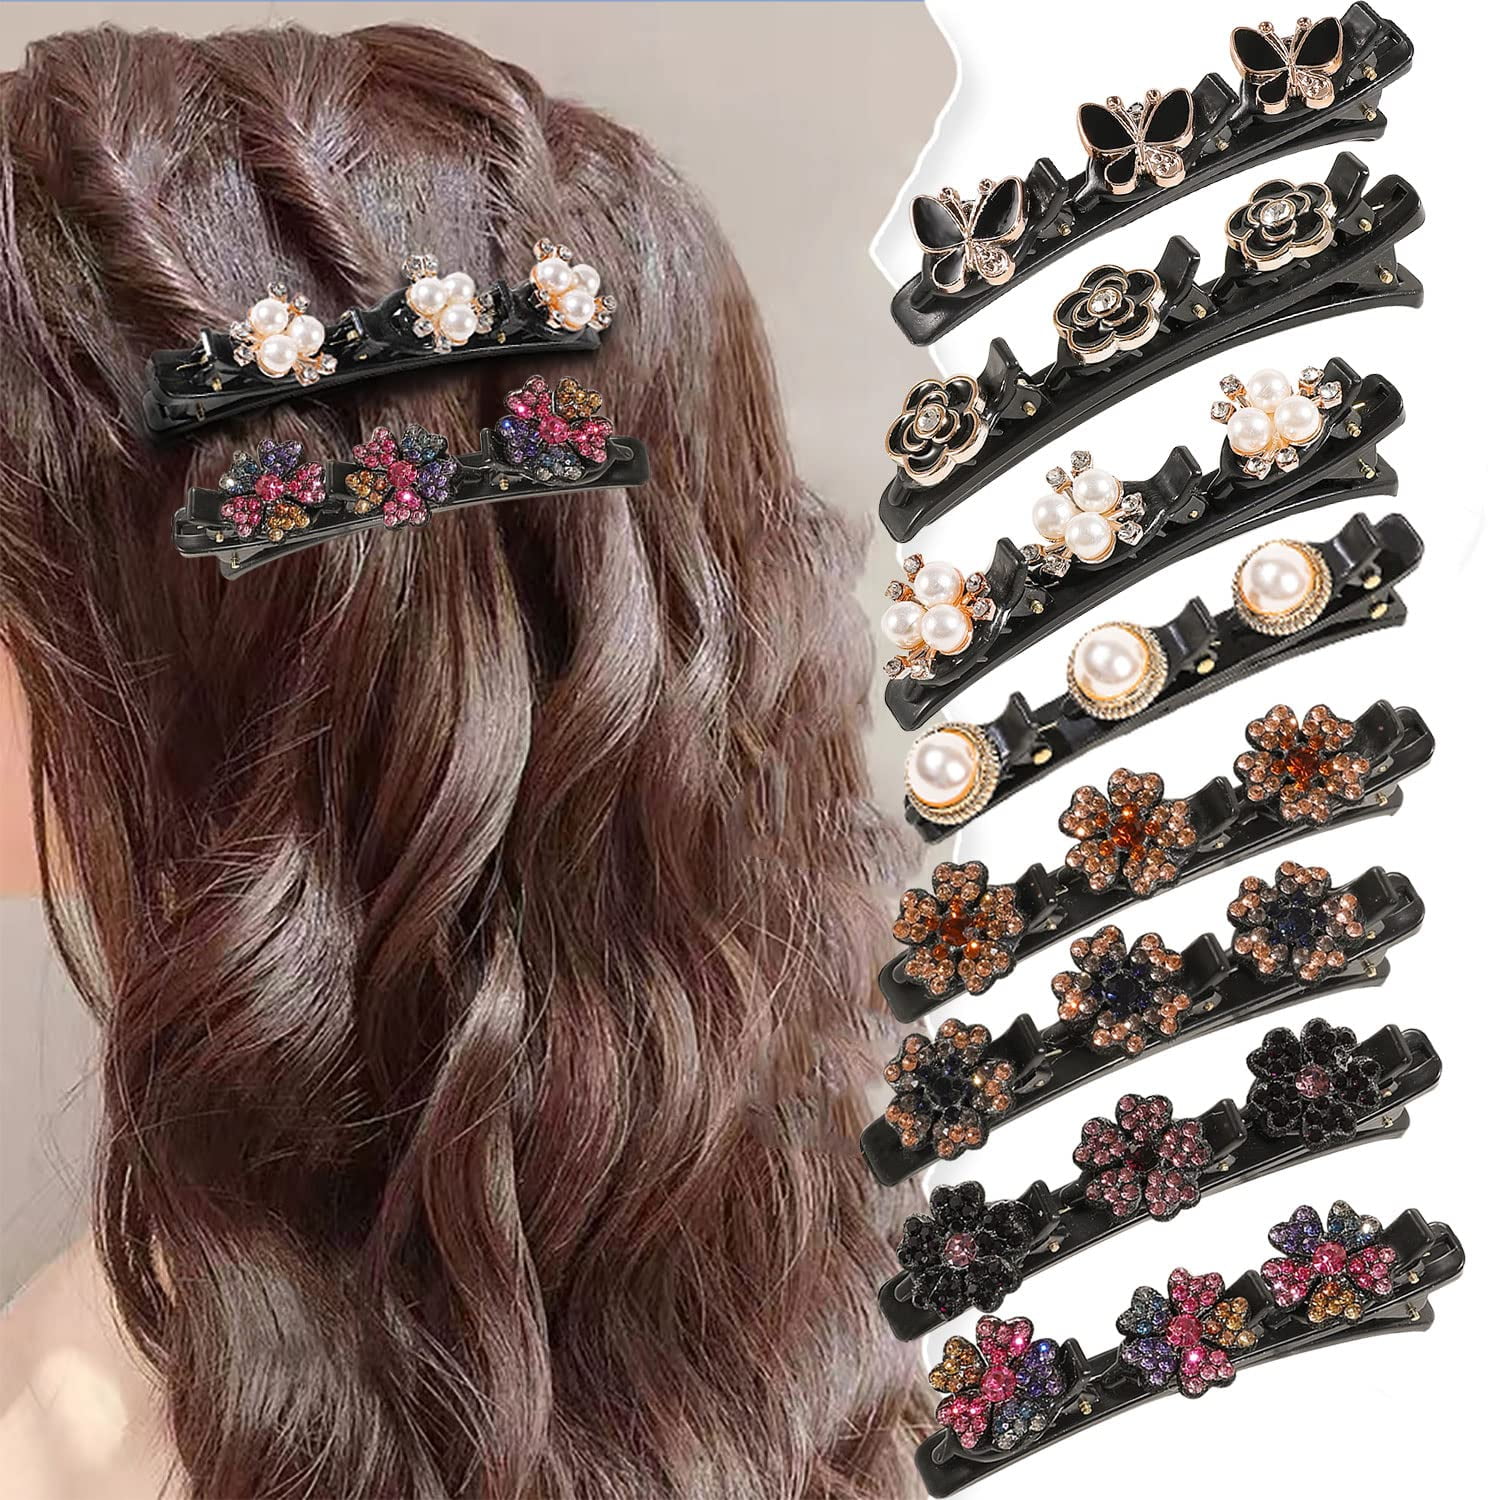  Sparkling Crystal Stone Braided Hair Clips for Women Hair  Clips for Styling Sectioning Hair Barrettes with Rhinestones Hair Clips  with 3 Small Clips for girl (Pearl-8pcs) : Beauty & Personal